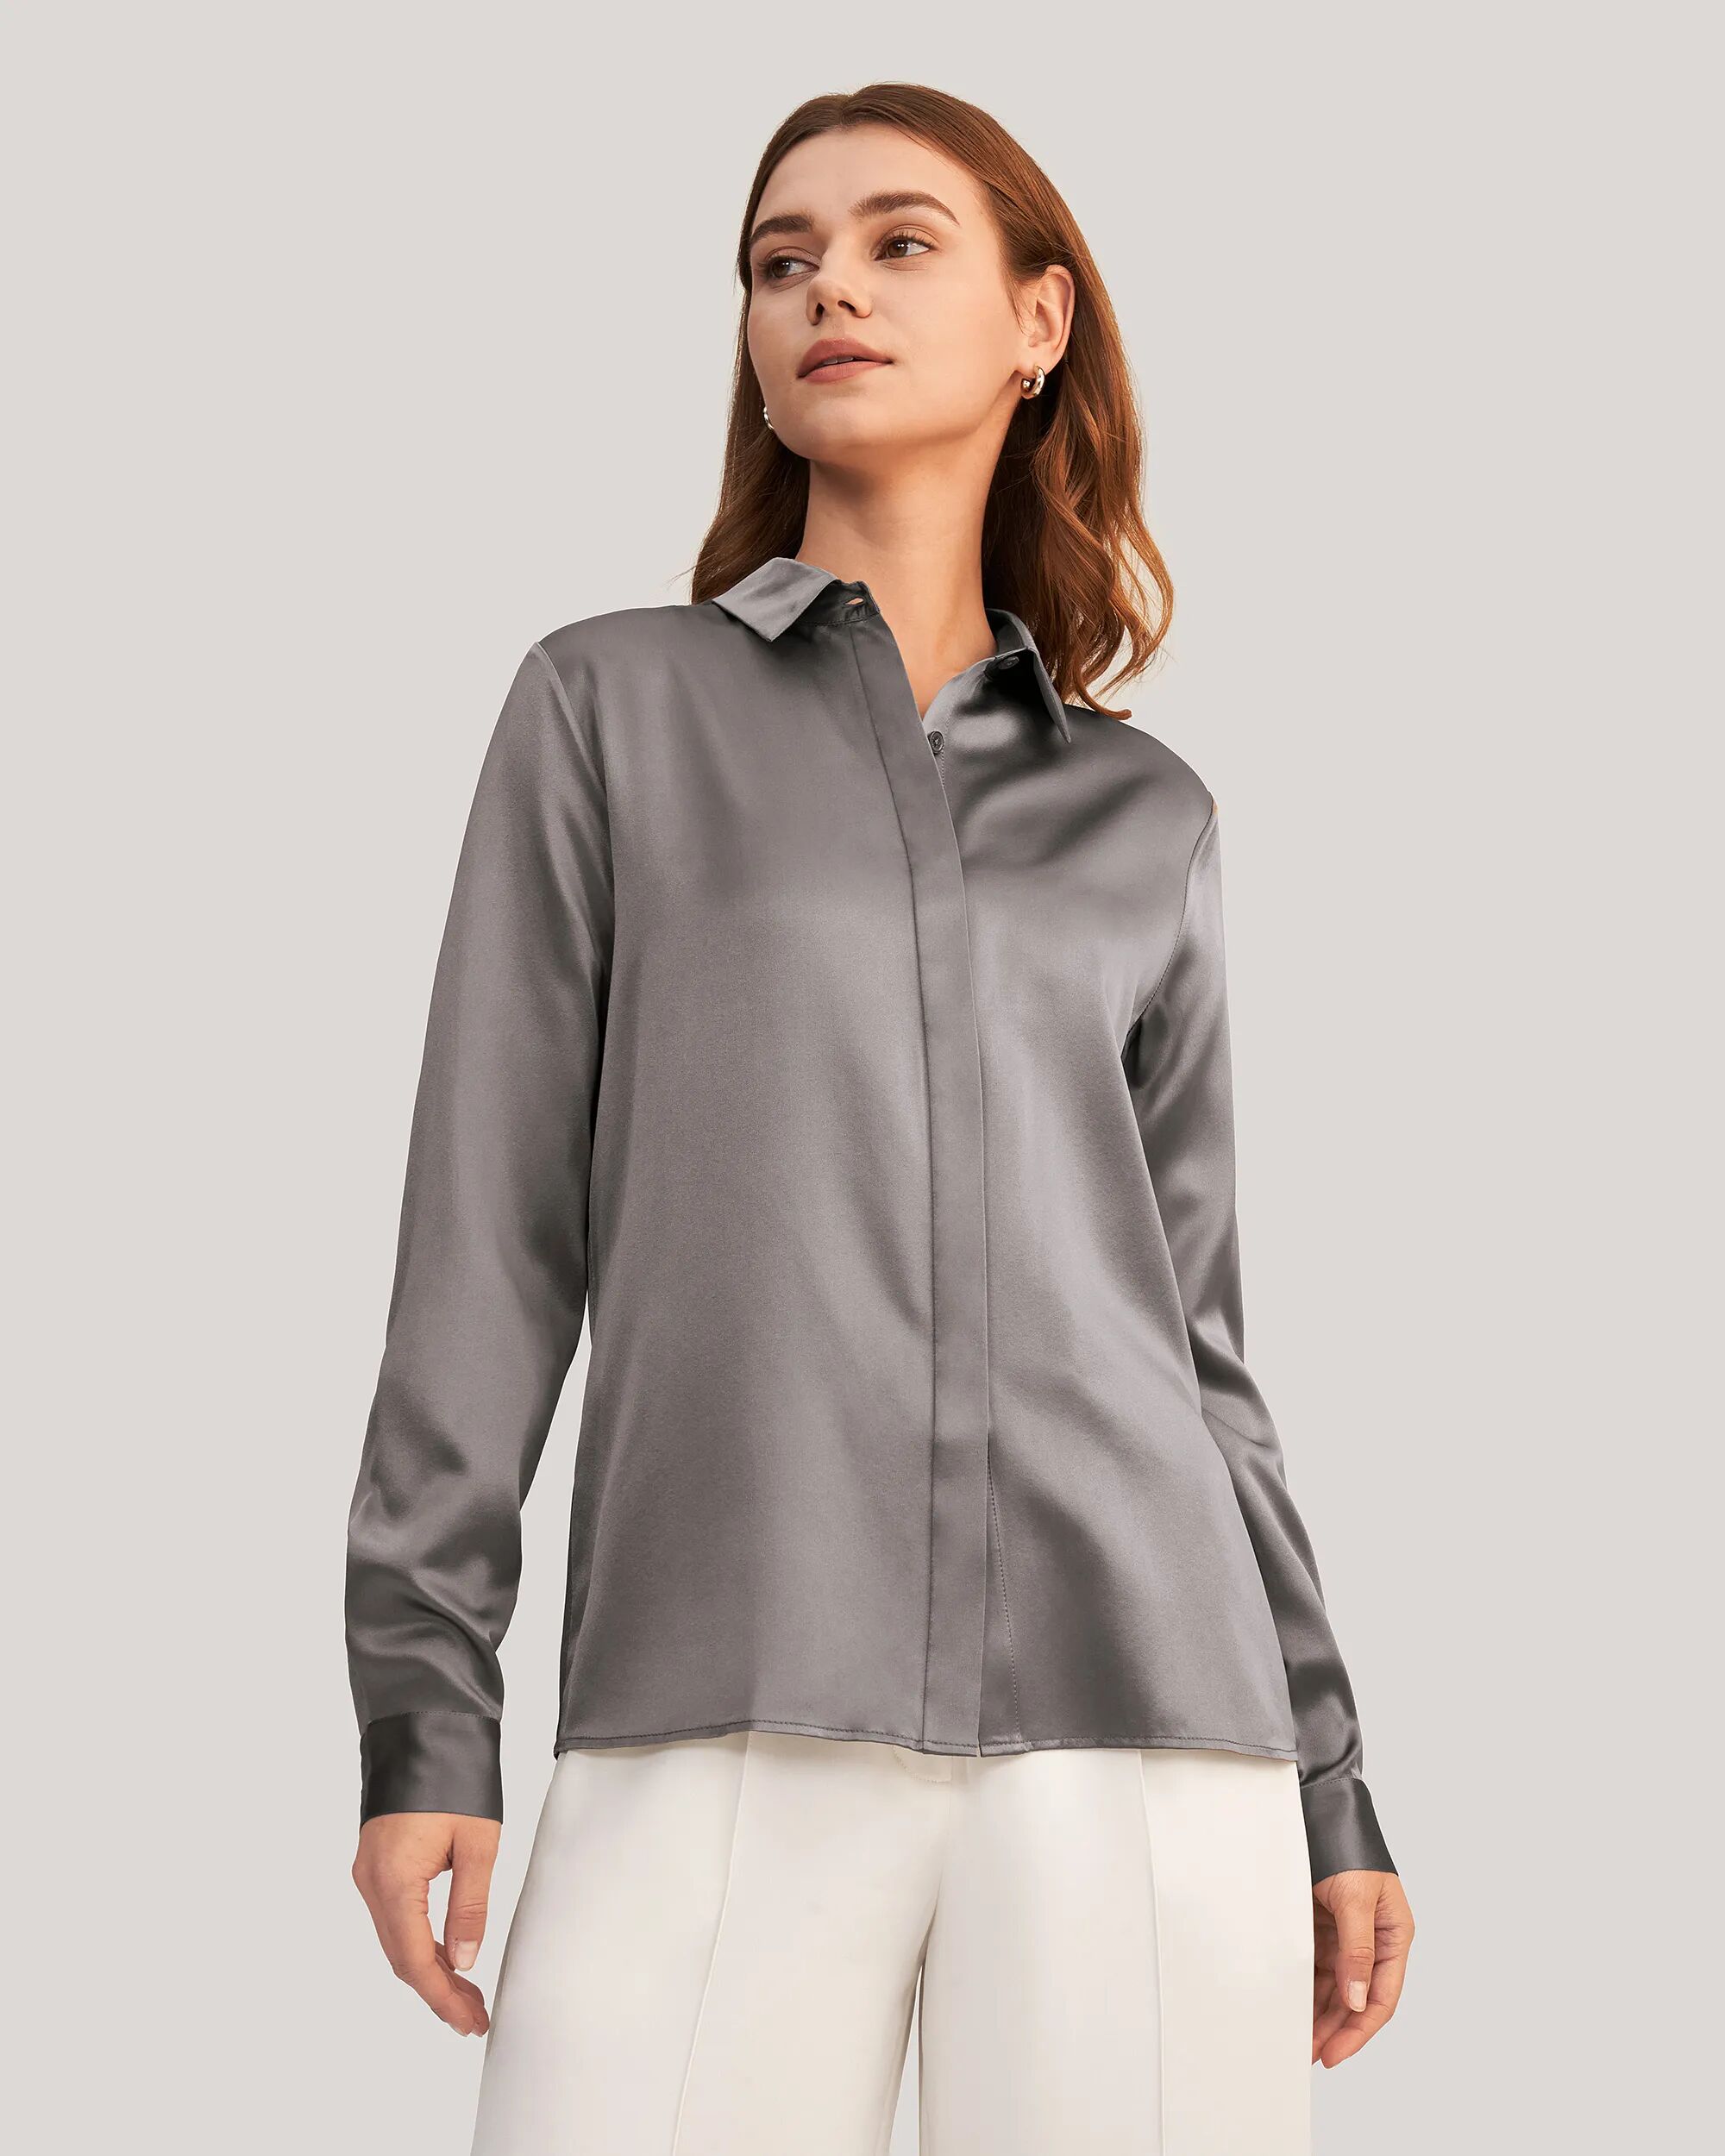 LILYSILK Business Gray Silk Shirt   Plain   100% Silk Women Long-Sleeved Mother-Of-Pearl Buttons For Any Occasions Dark